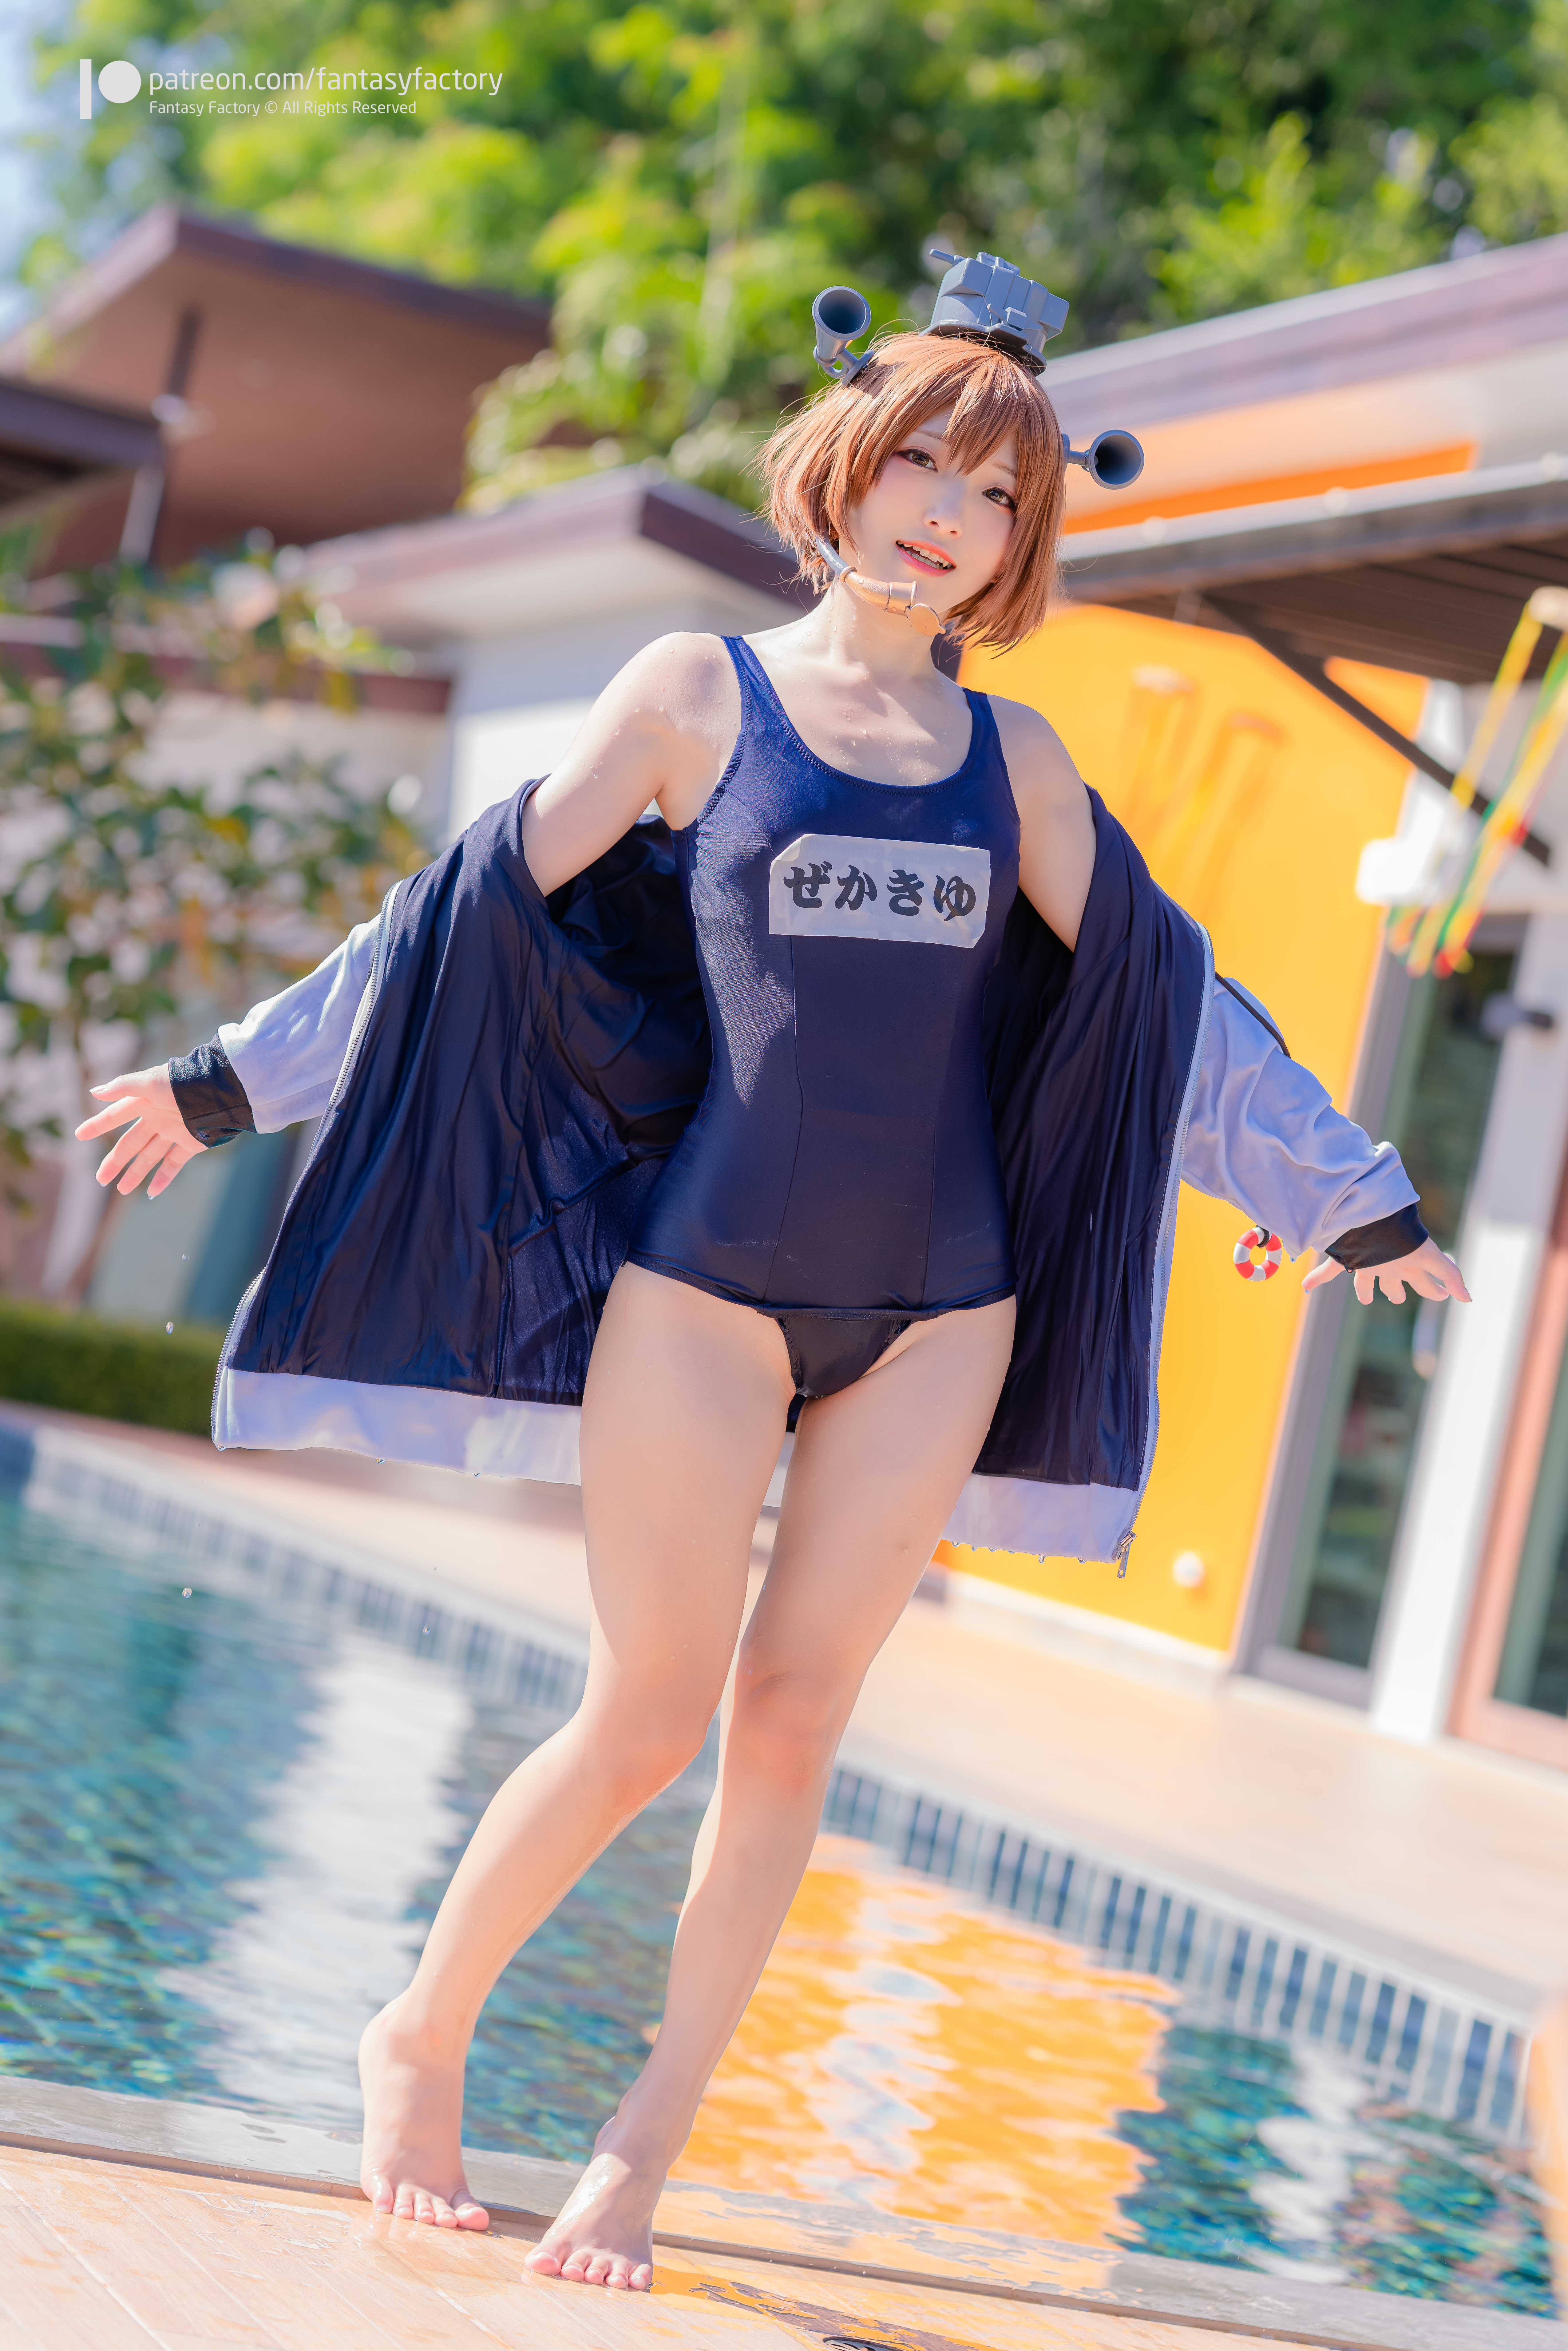 People 5100x7646 Fantasy Factory women model Asian cosplay Yukikaze (KanColle) Kantai Collection anime anime girls school swimsuits jacket looking at viewer swimming pool standing barefoot tiptoe wet body wet clothing outdoors women outdoors portrait display swimwear smiling pointed toes